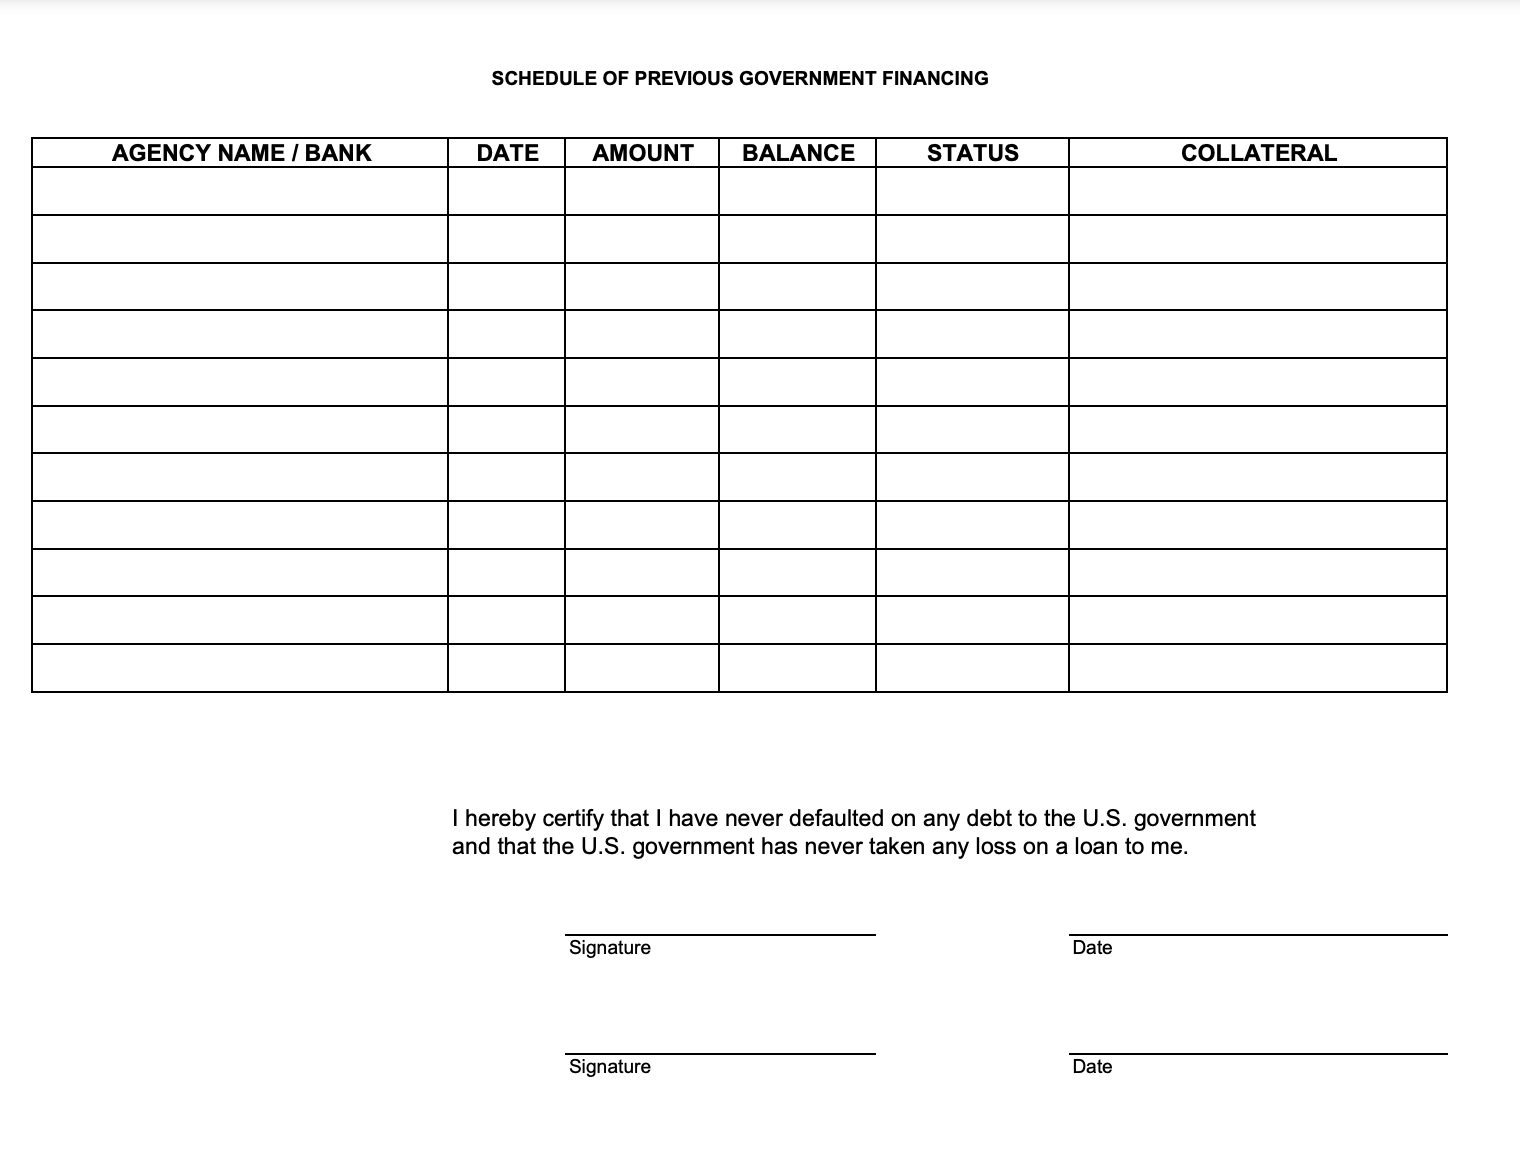 SCHEDULE OF PREVIOUS GOVERNMENT FINANCING form image